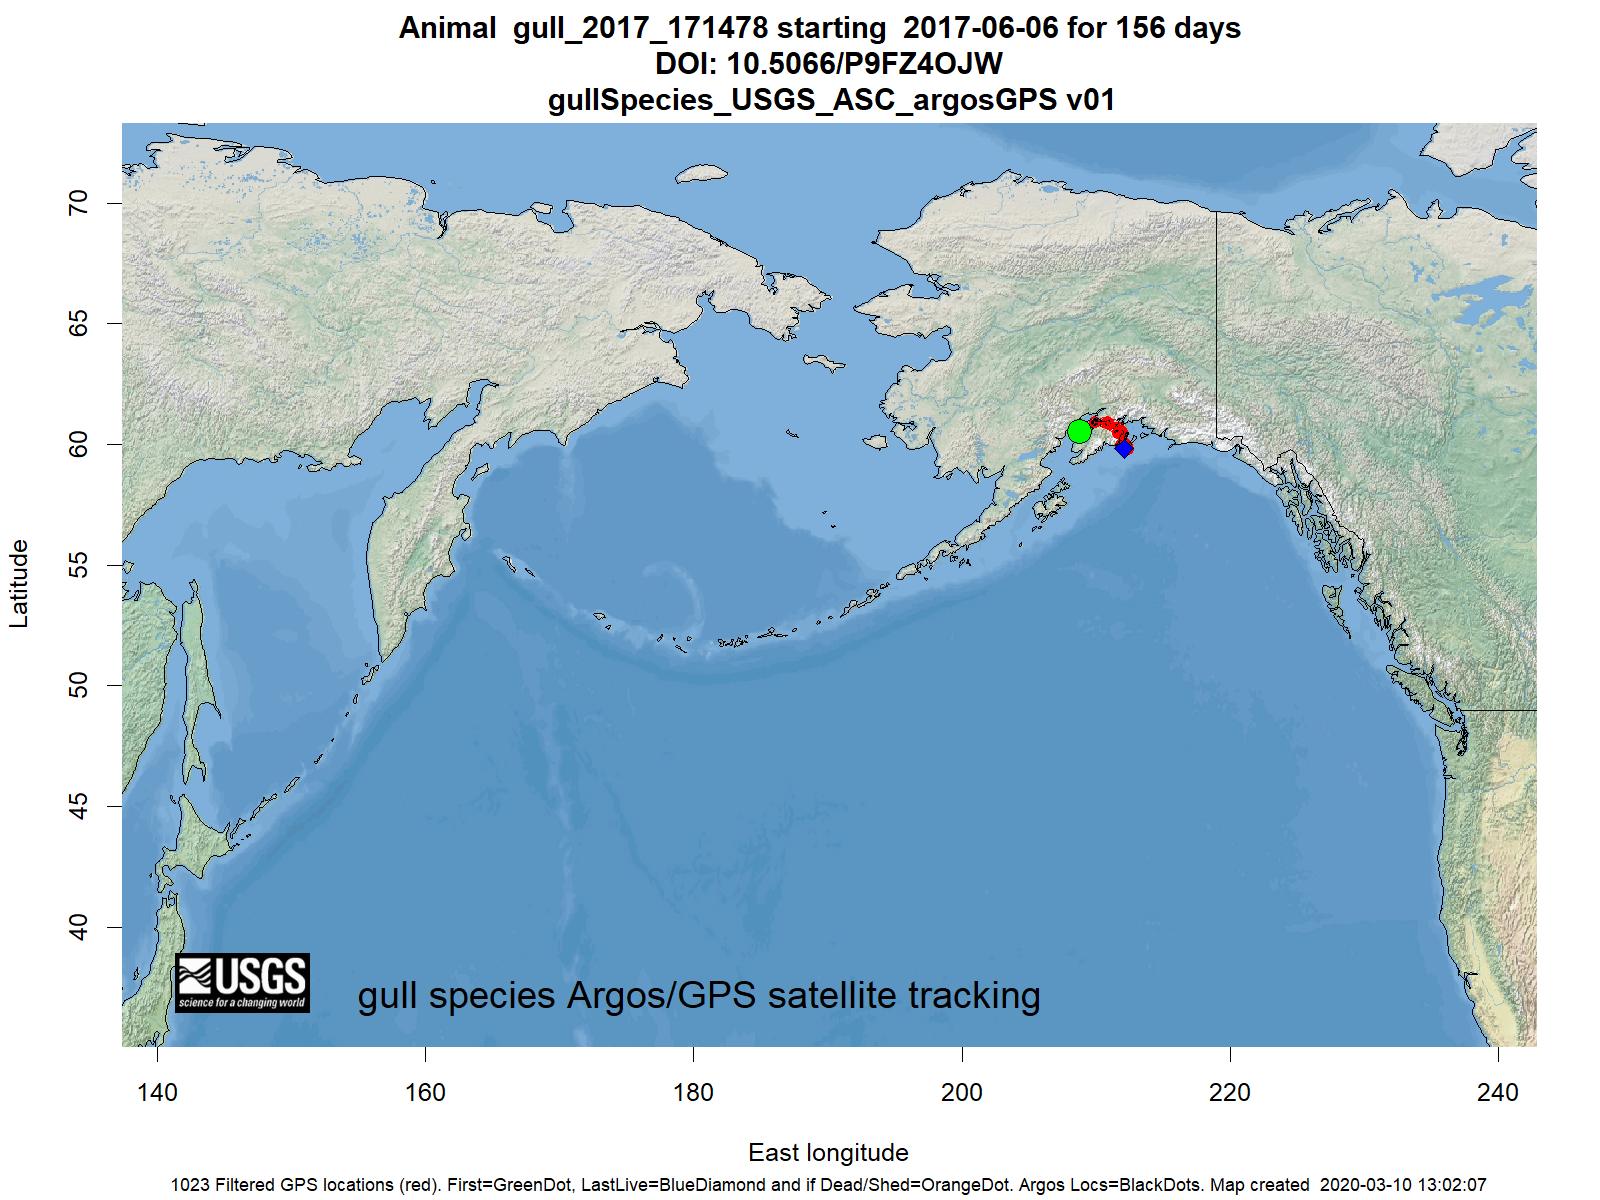 Tracking map for species gull_2017_171478